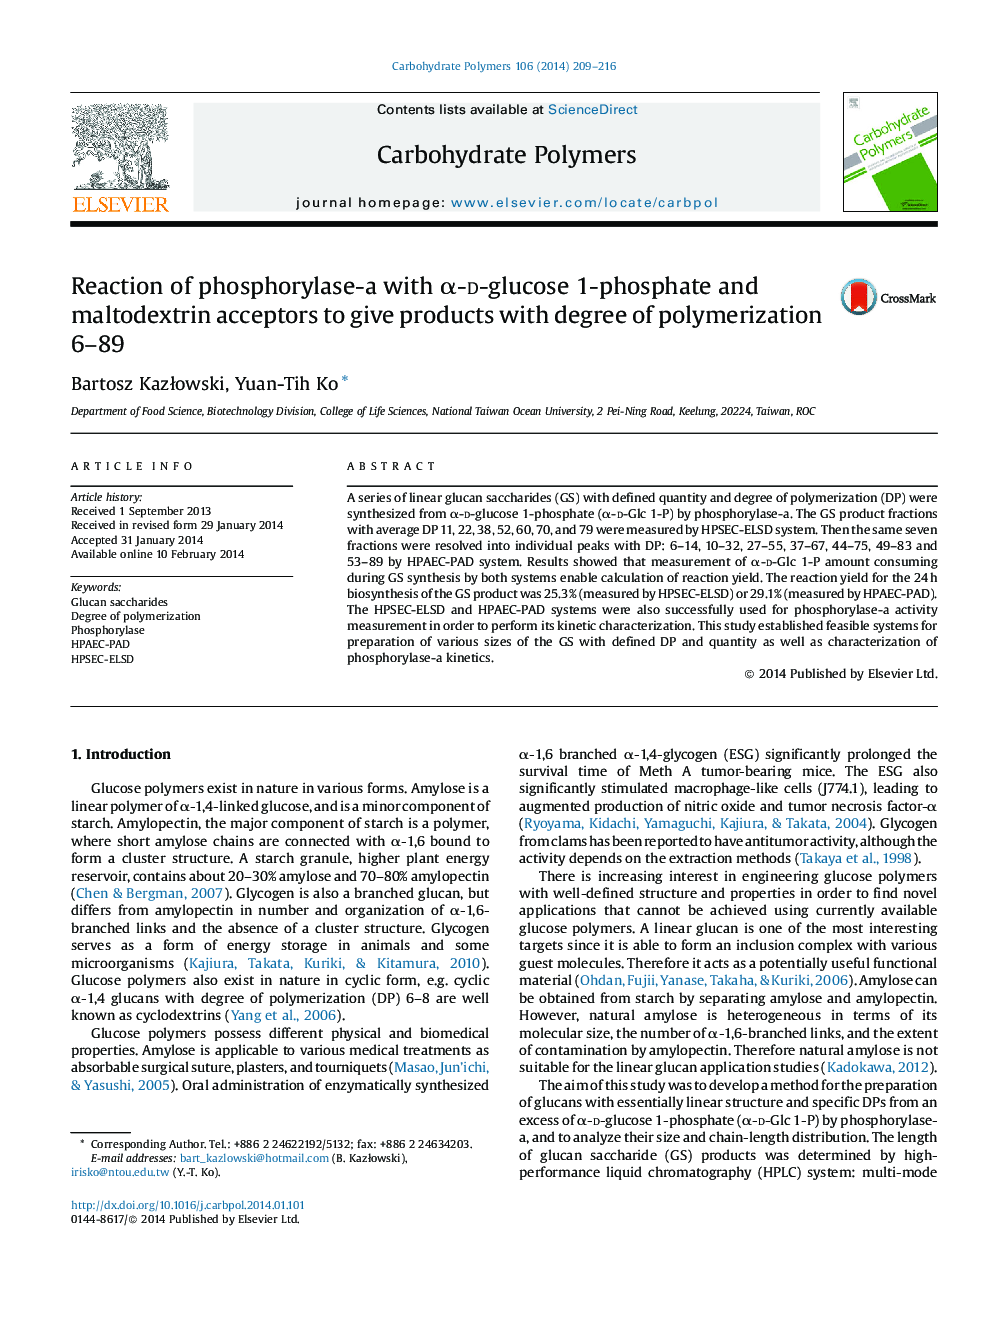 Reaction of phosphorylase-a with α-d-glucose 1-phosphate and maltodextrin acceptors to give products with degree of polymerization 6–89